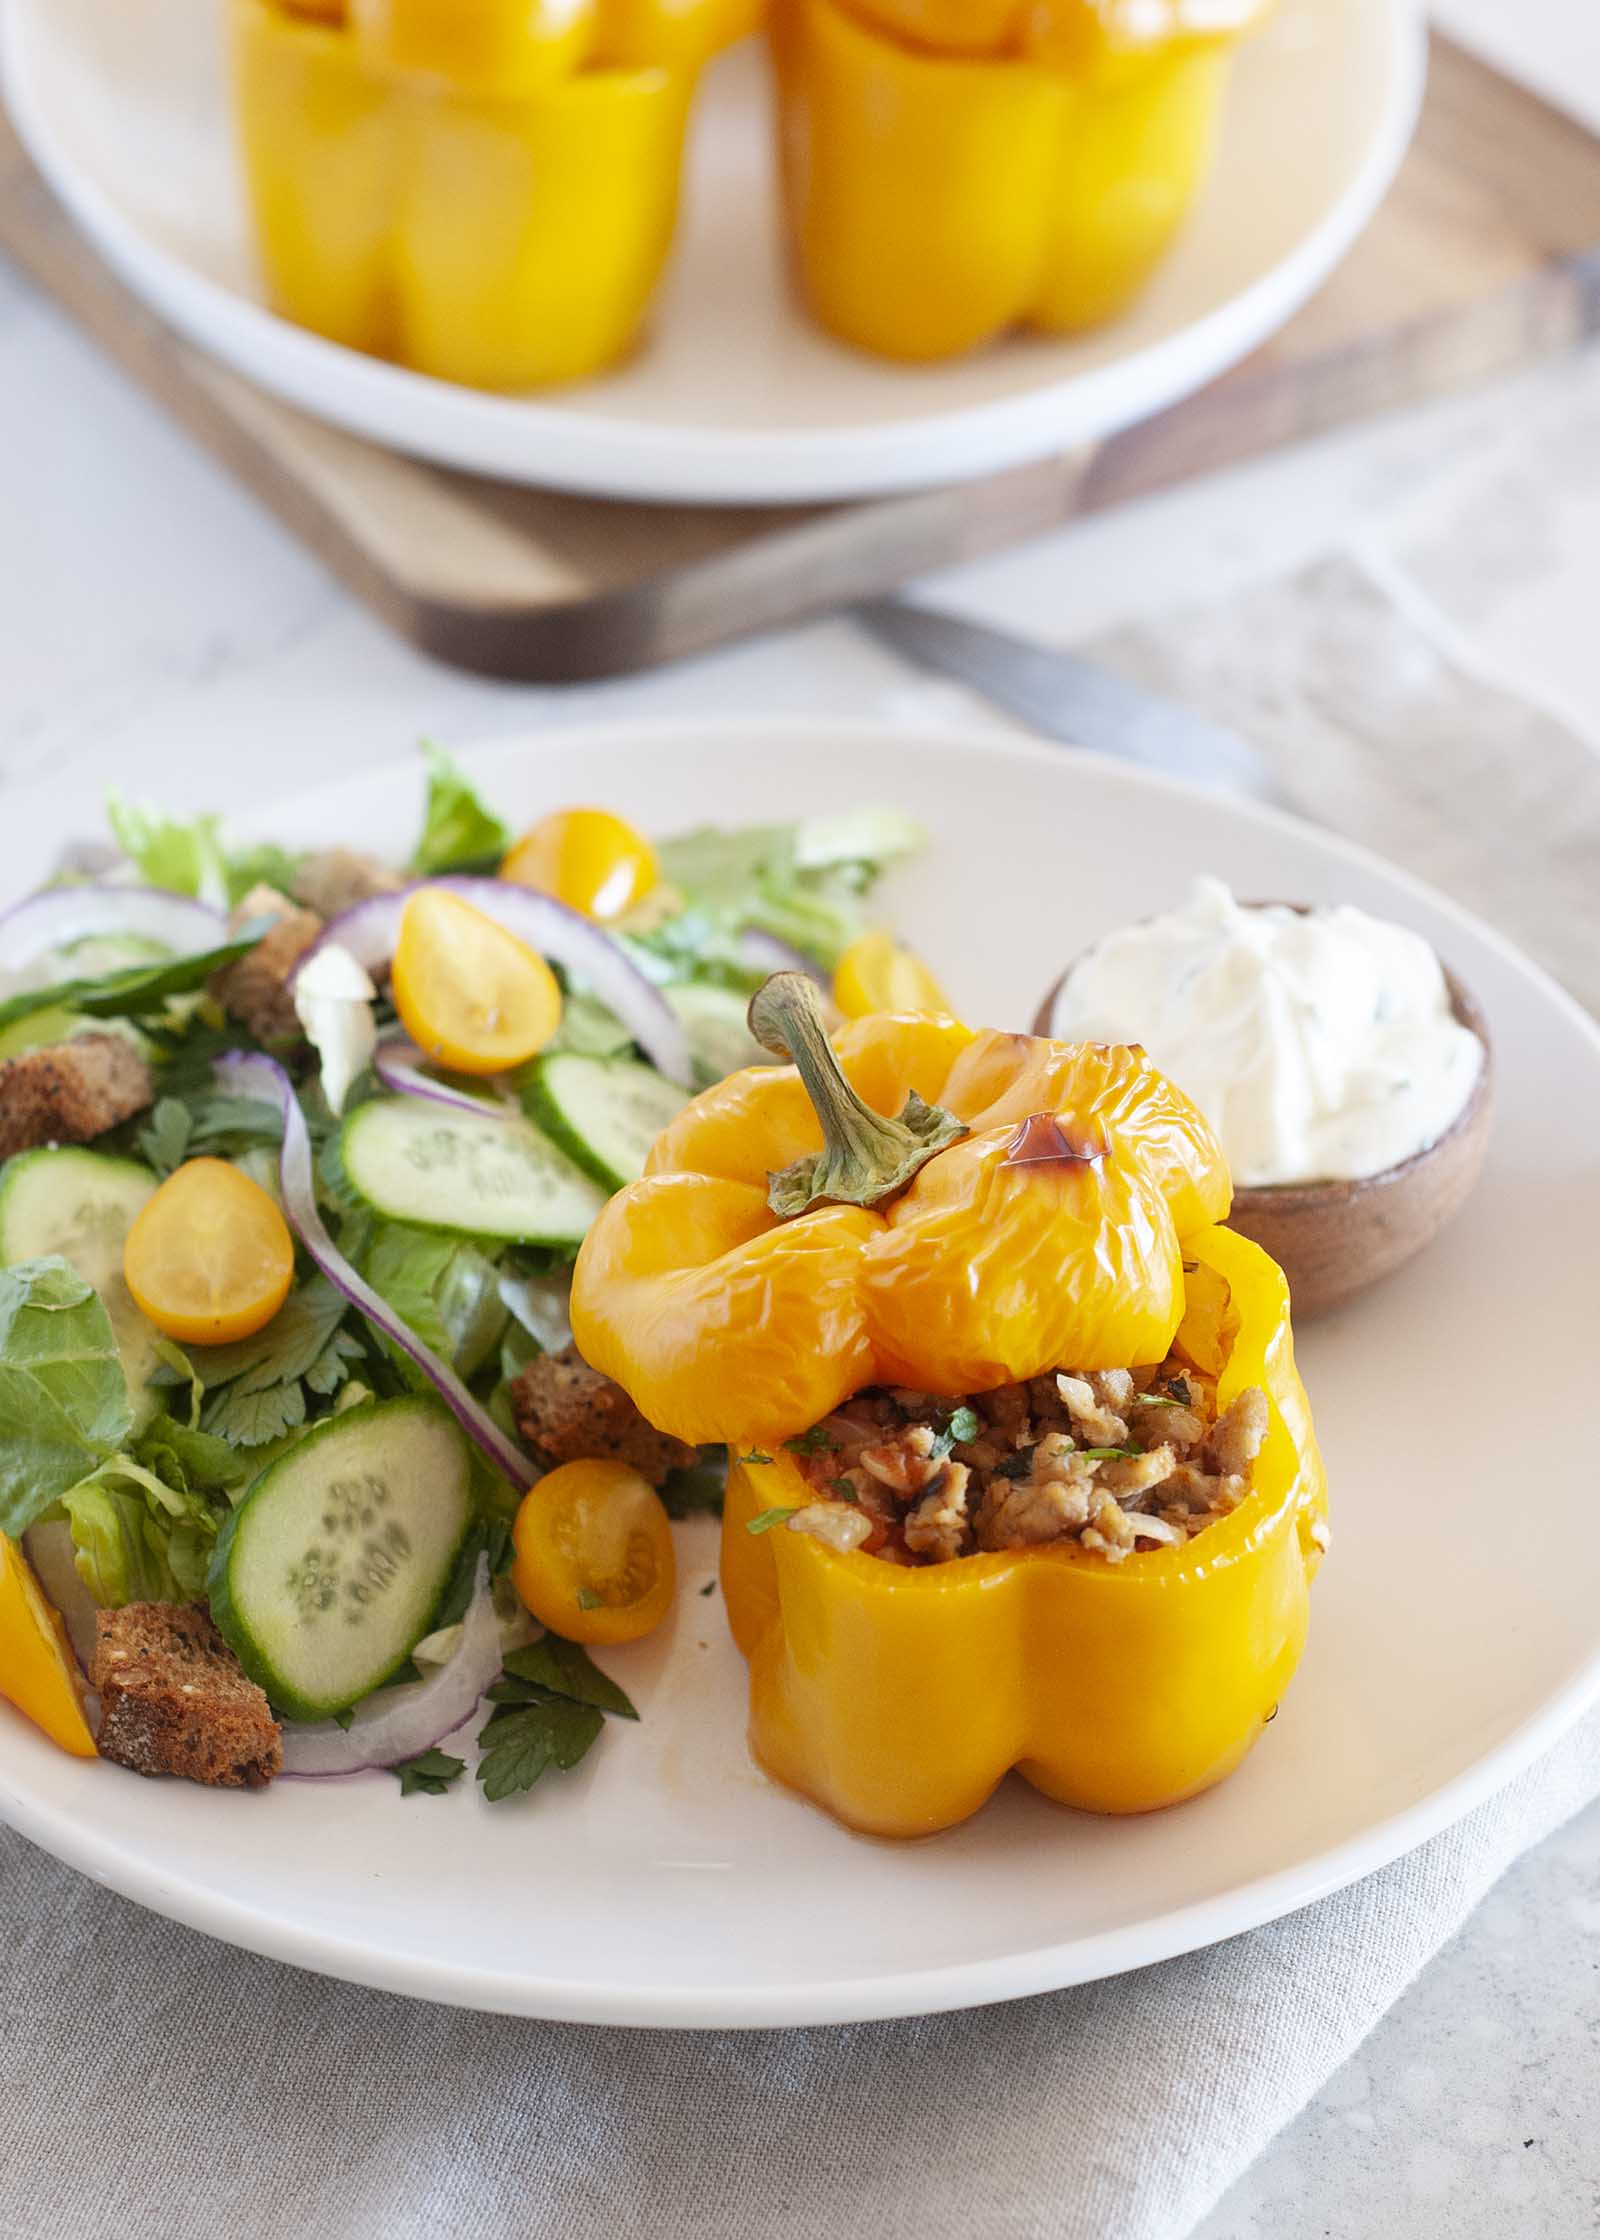 Healthy stuffed pepper with chicken is on a plate with the top askew to reveal the ground chicken filling. A yogurt sauce and garden salad are on the plate as well. Additional peppers are behind the plate.